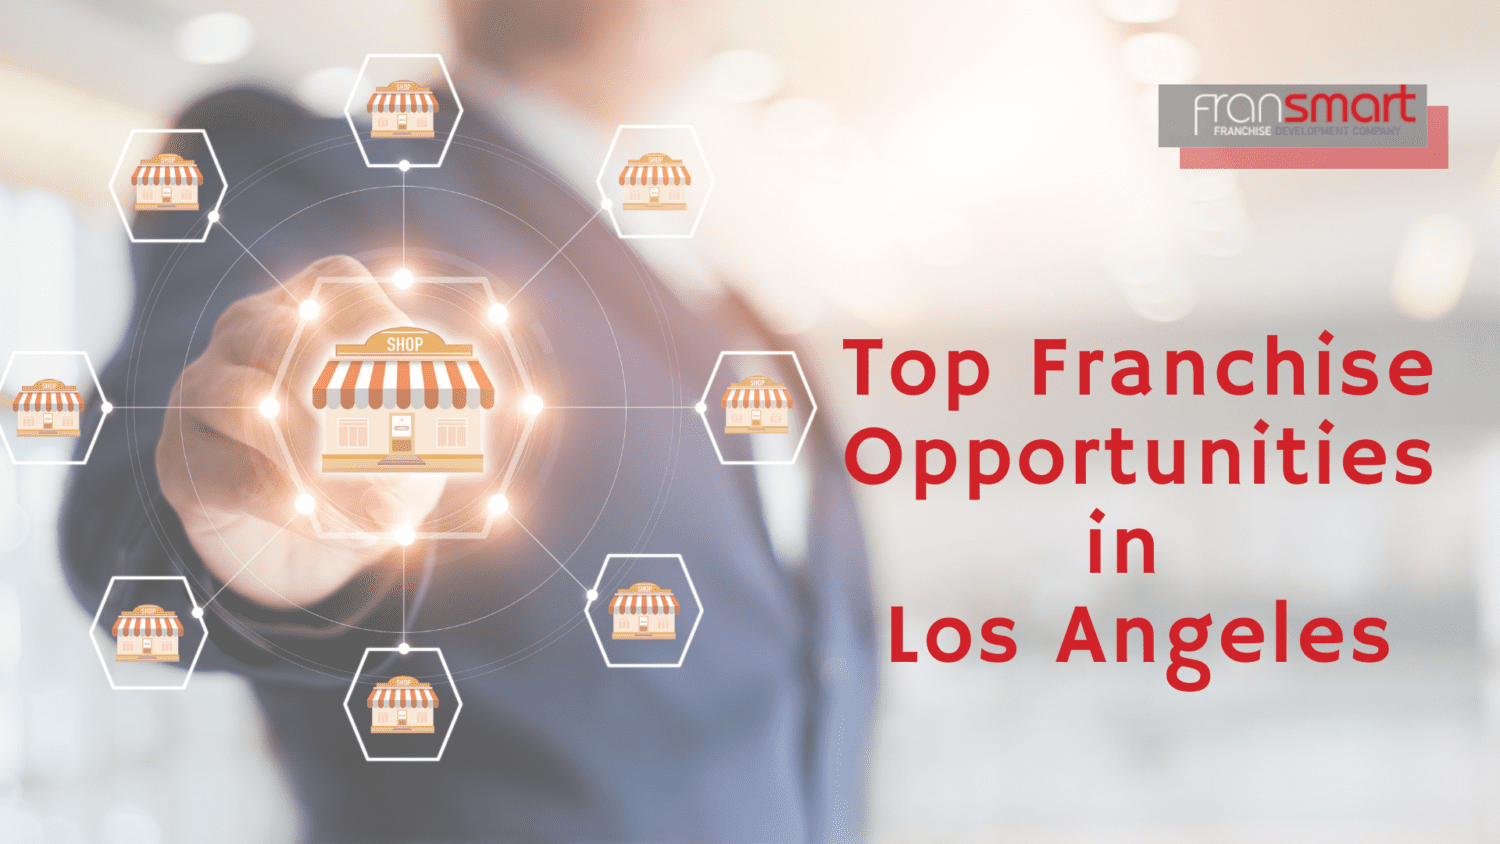 Top Franchise Opportunities in Los Angeles